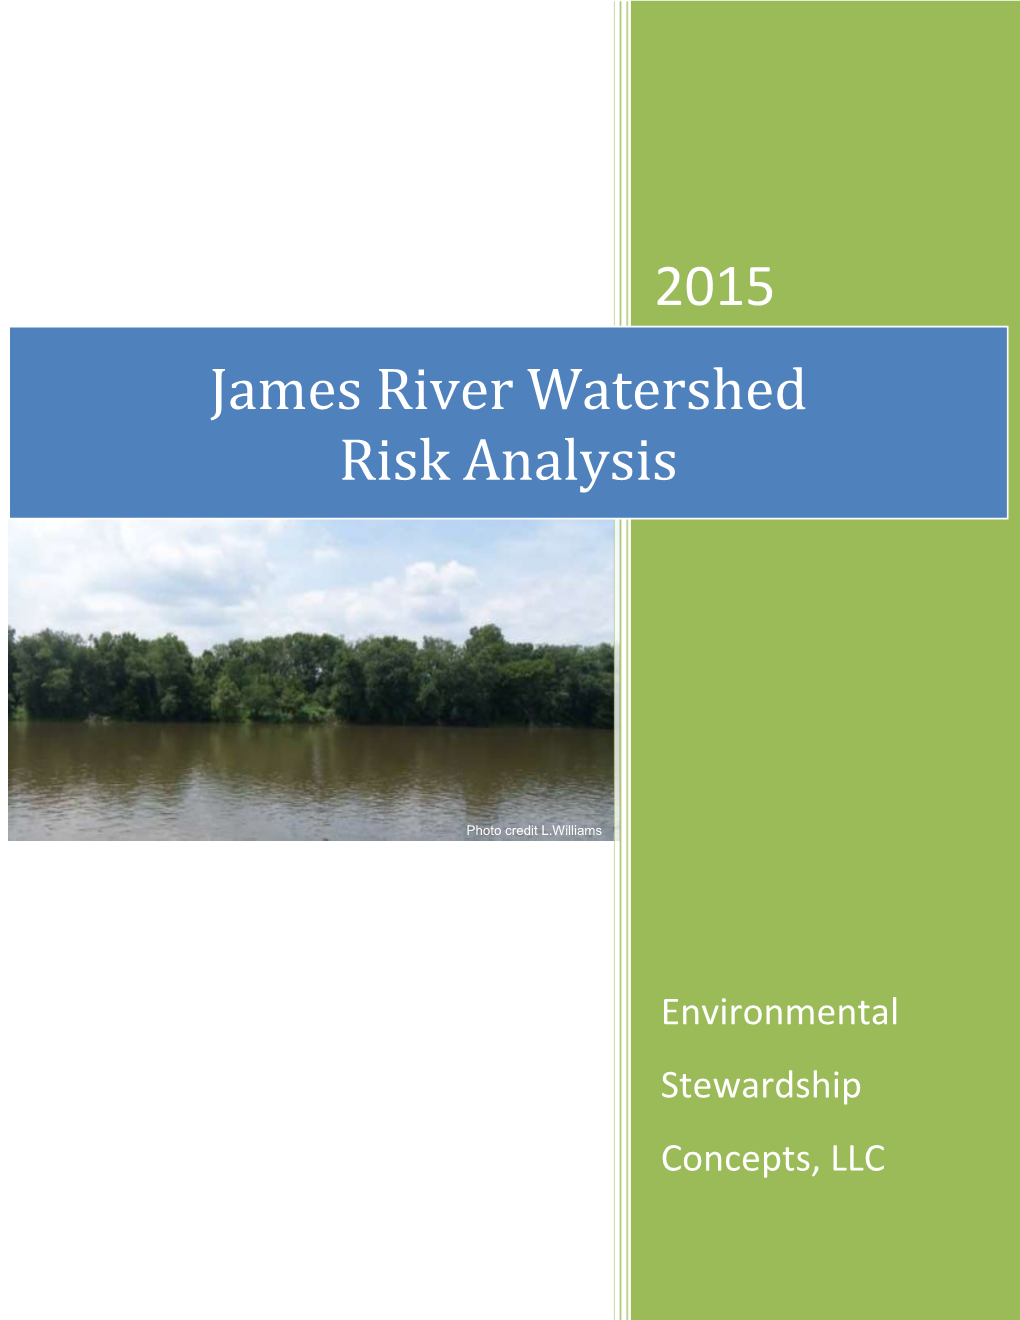 James River Watershed Risk Analysis